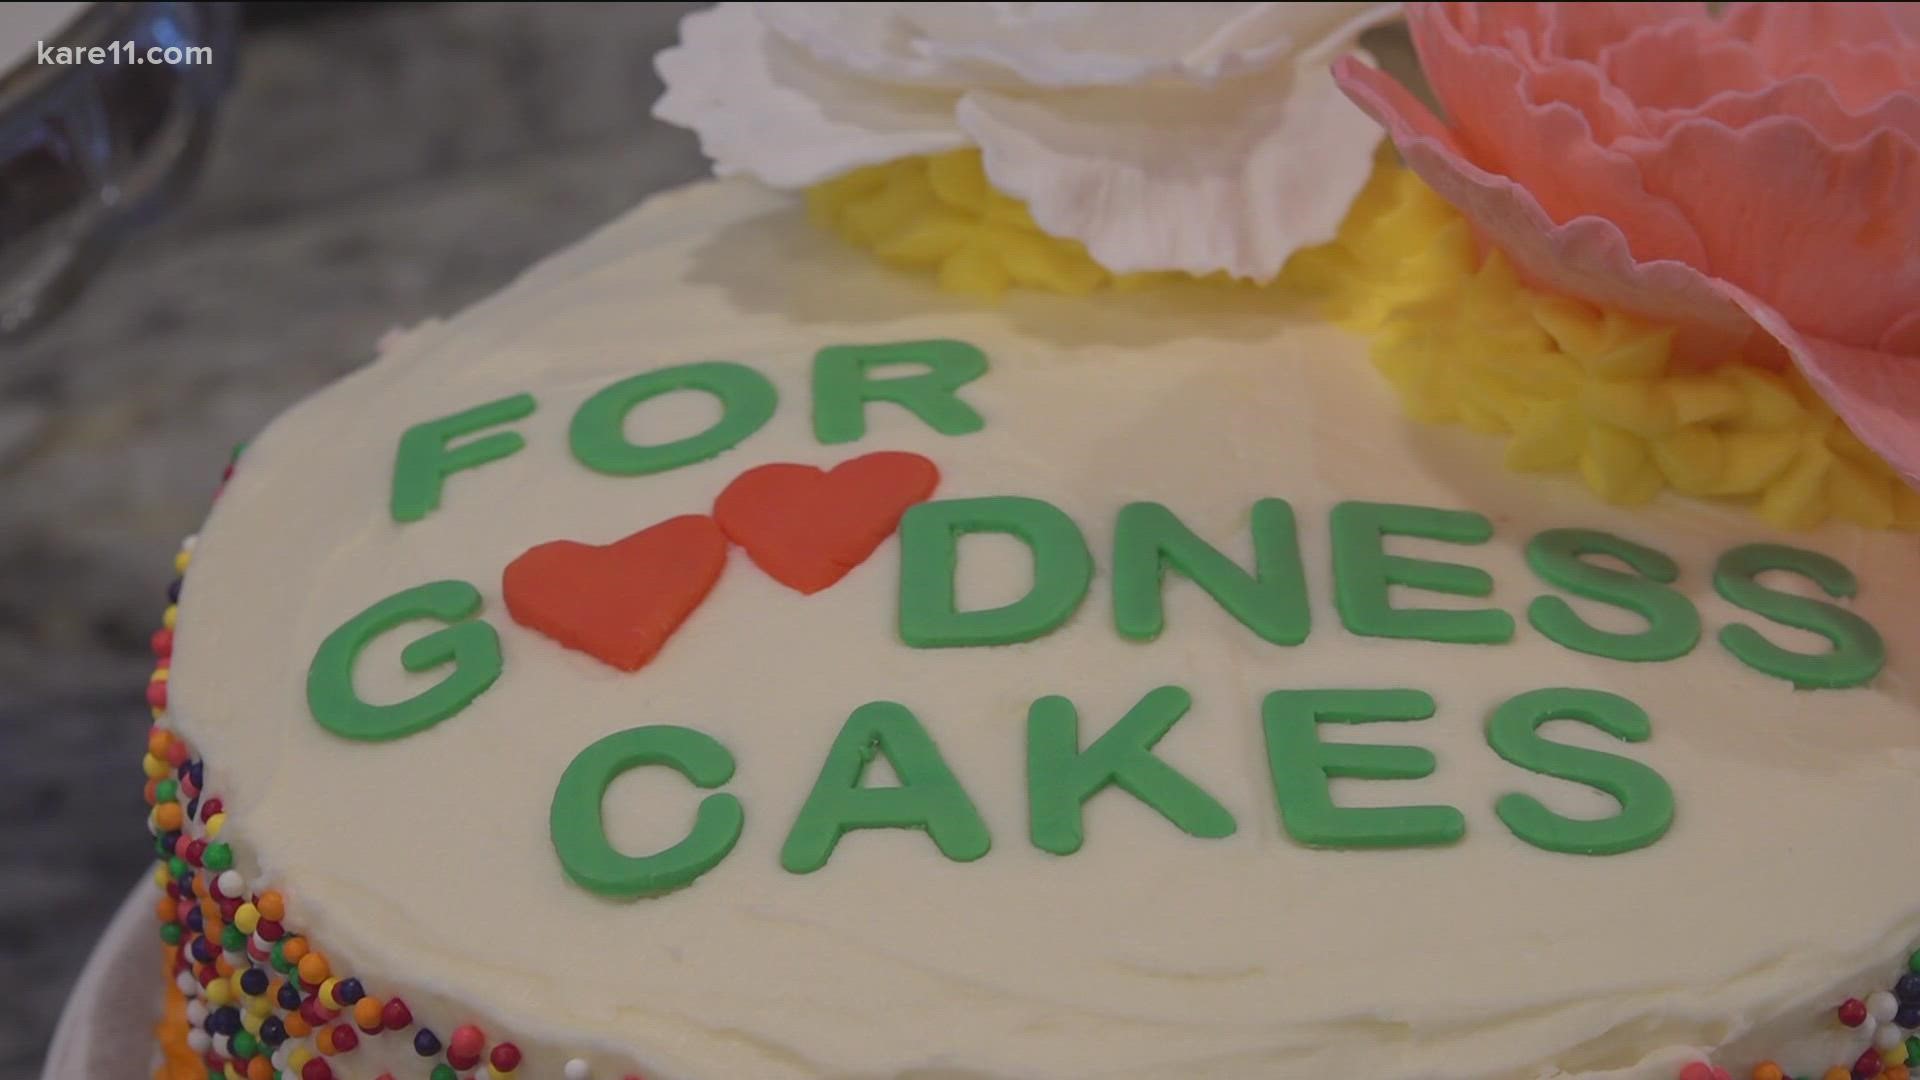 The community organization is making a difference by creating unique birthday treats for local children and teens in need.